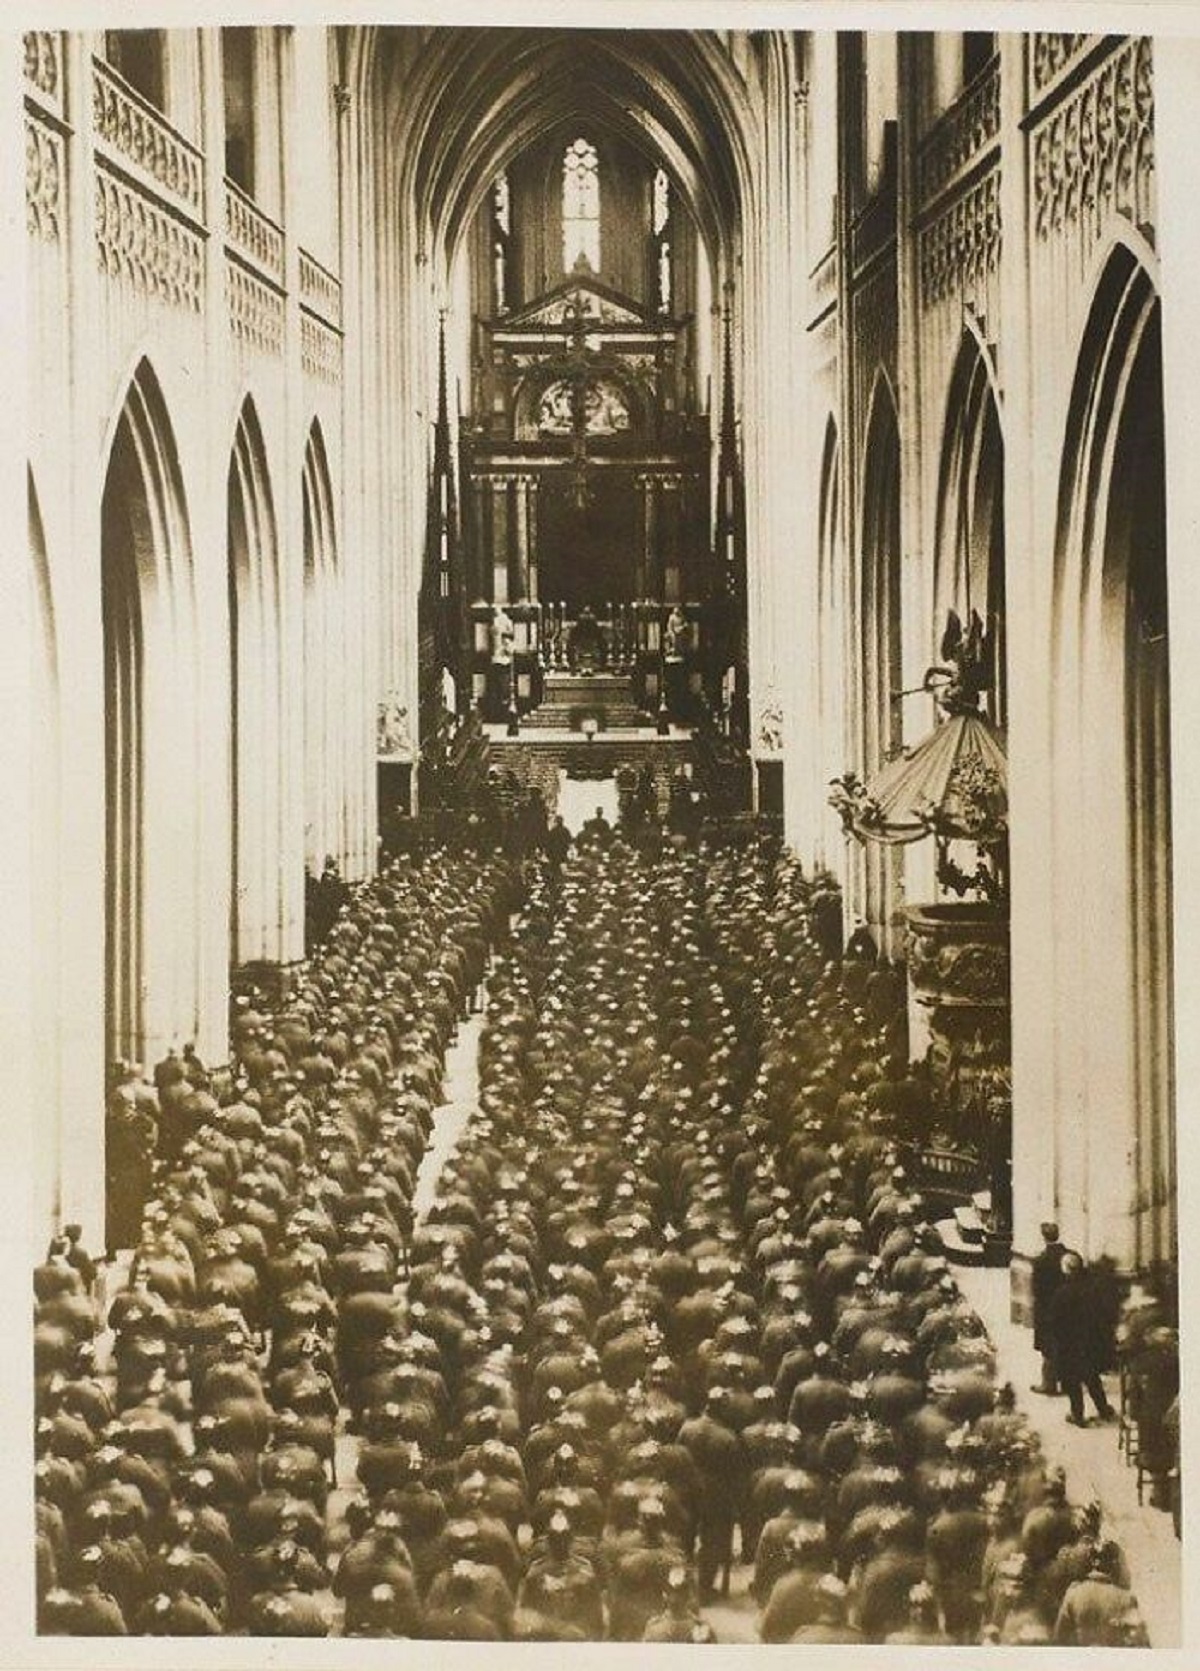 German soldiers in the Antwerp cathedral after capturing the city in 1914.